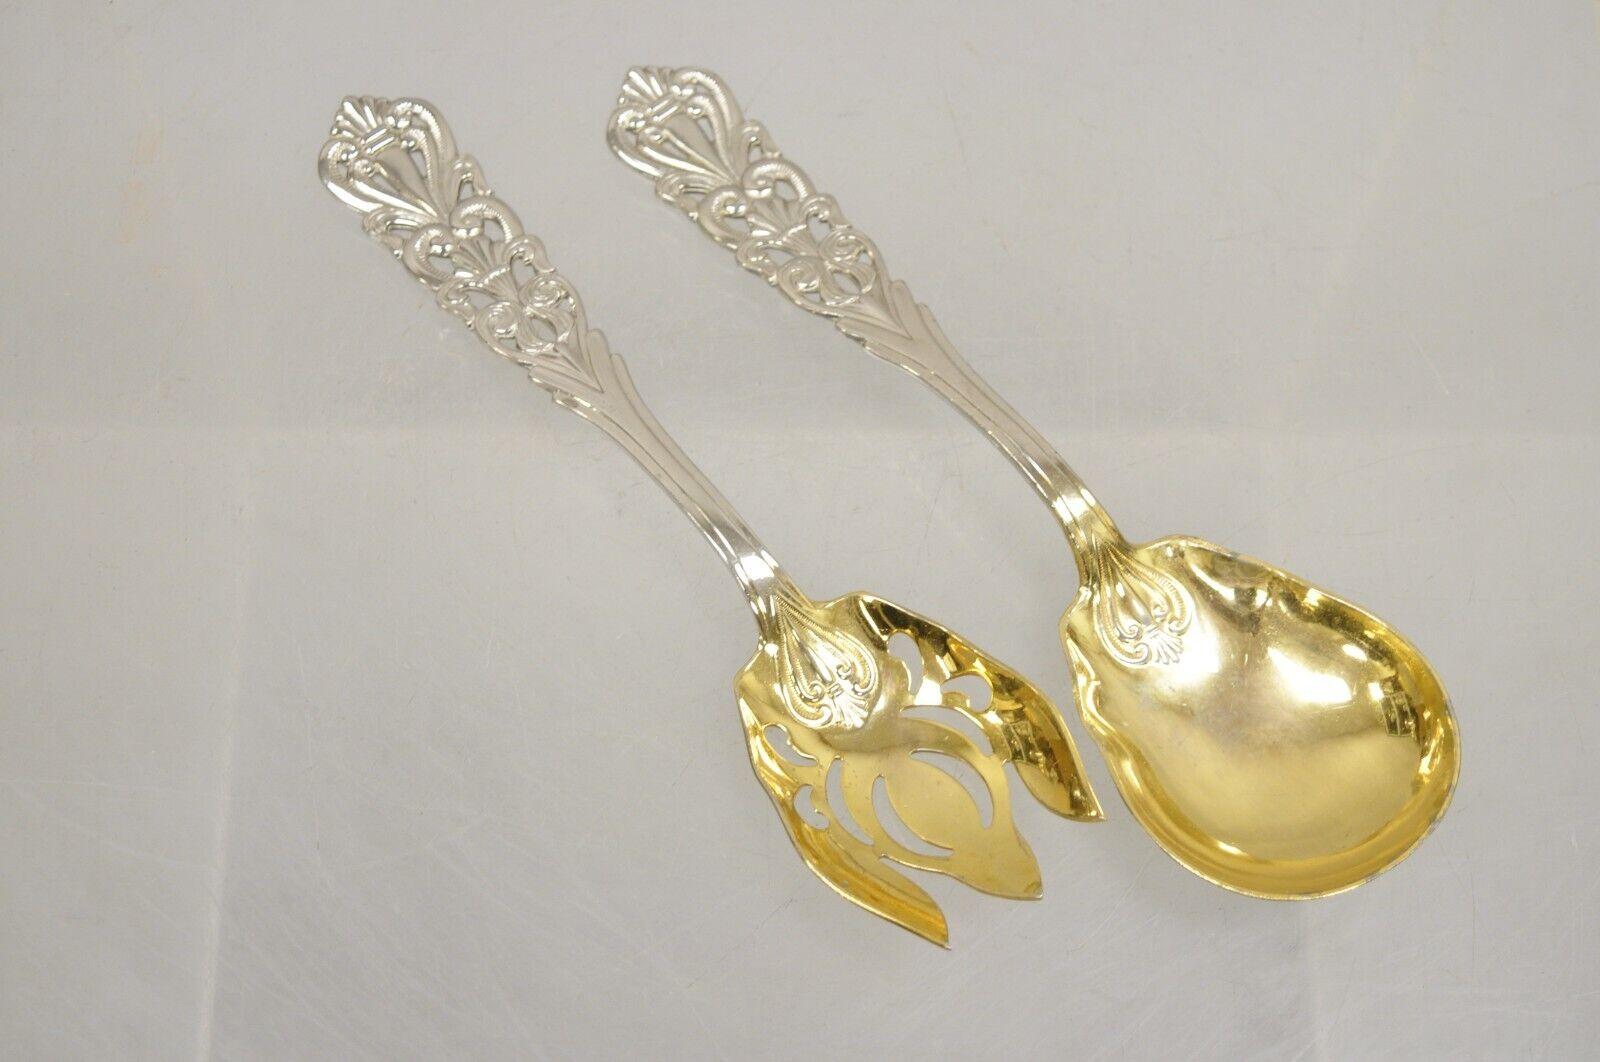 Vintage Italian Baroque Style EPNS Silver & Gold Plated Serving Spoon and Fork S In Good Condition For Sale In Philadelphia, PA